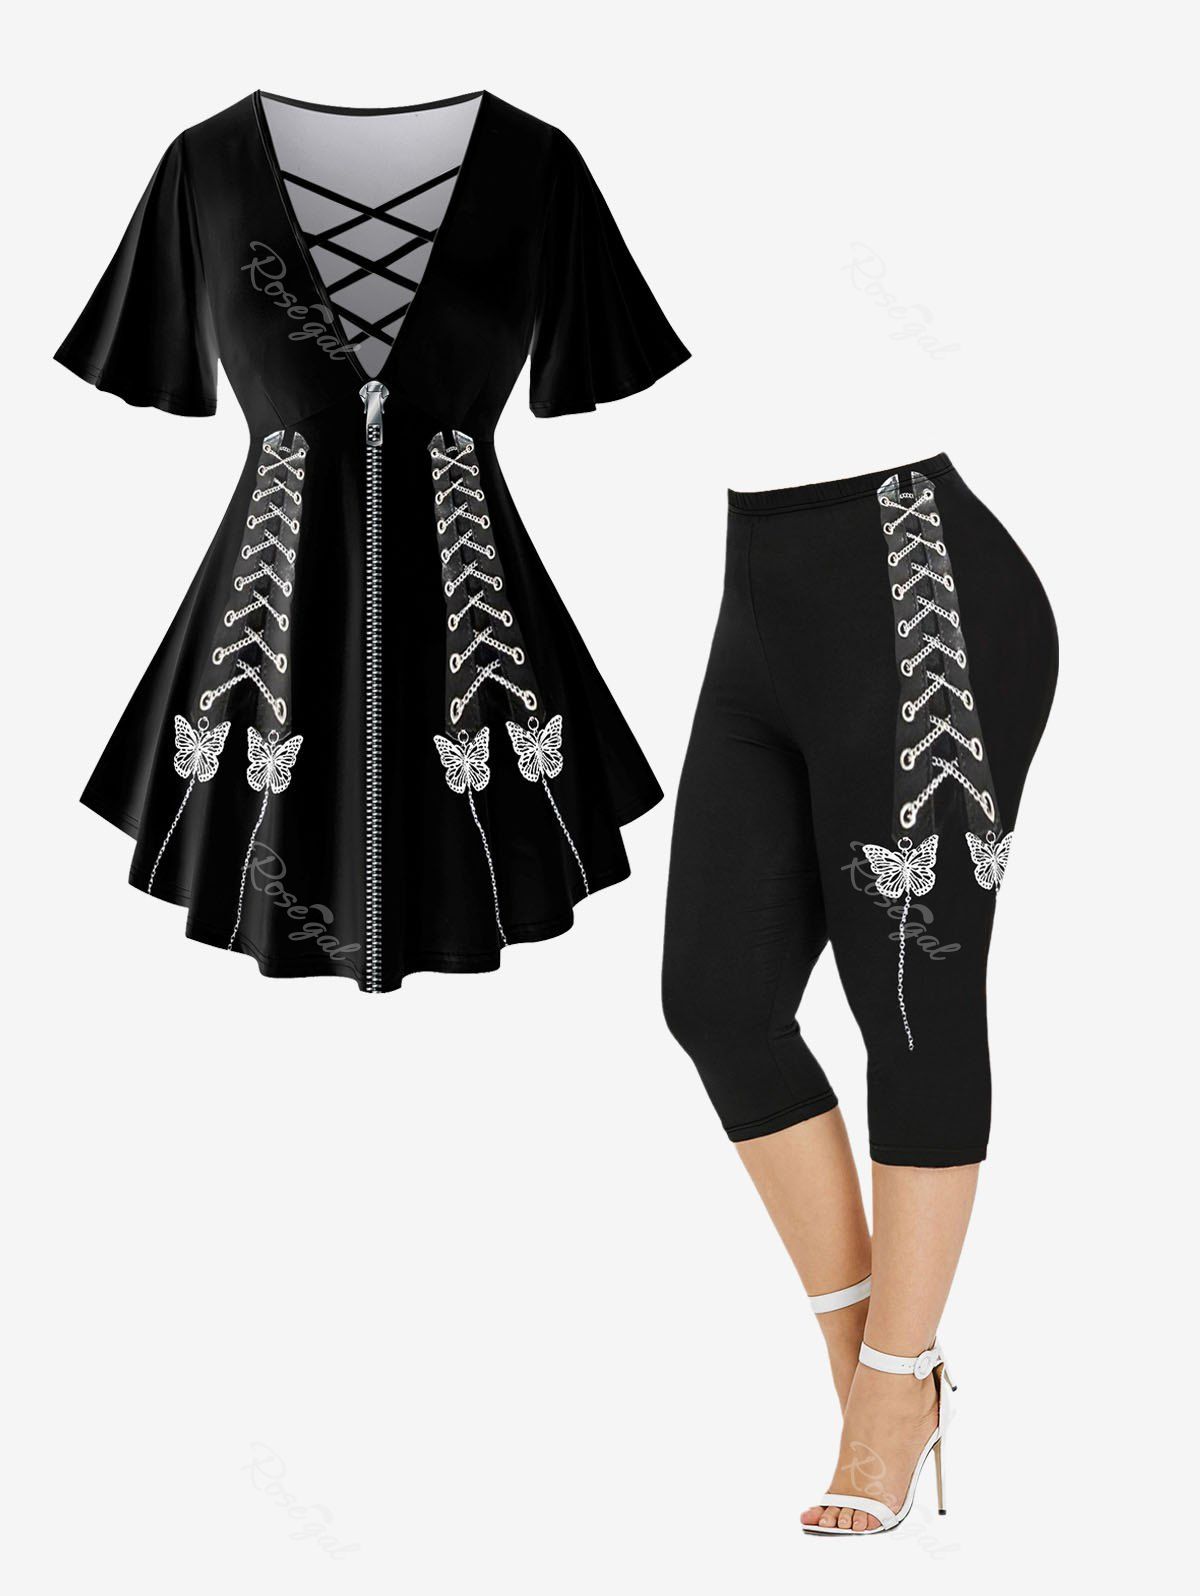 Hot 3D Crisscross V-Neck Butterfly Lace Up Printed T-Shirt and Leggings Plus Size Matching Set  